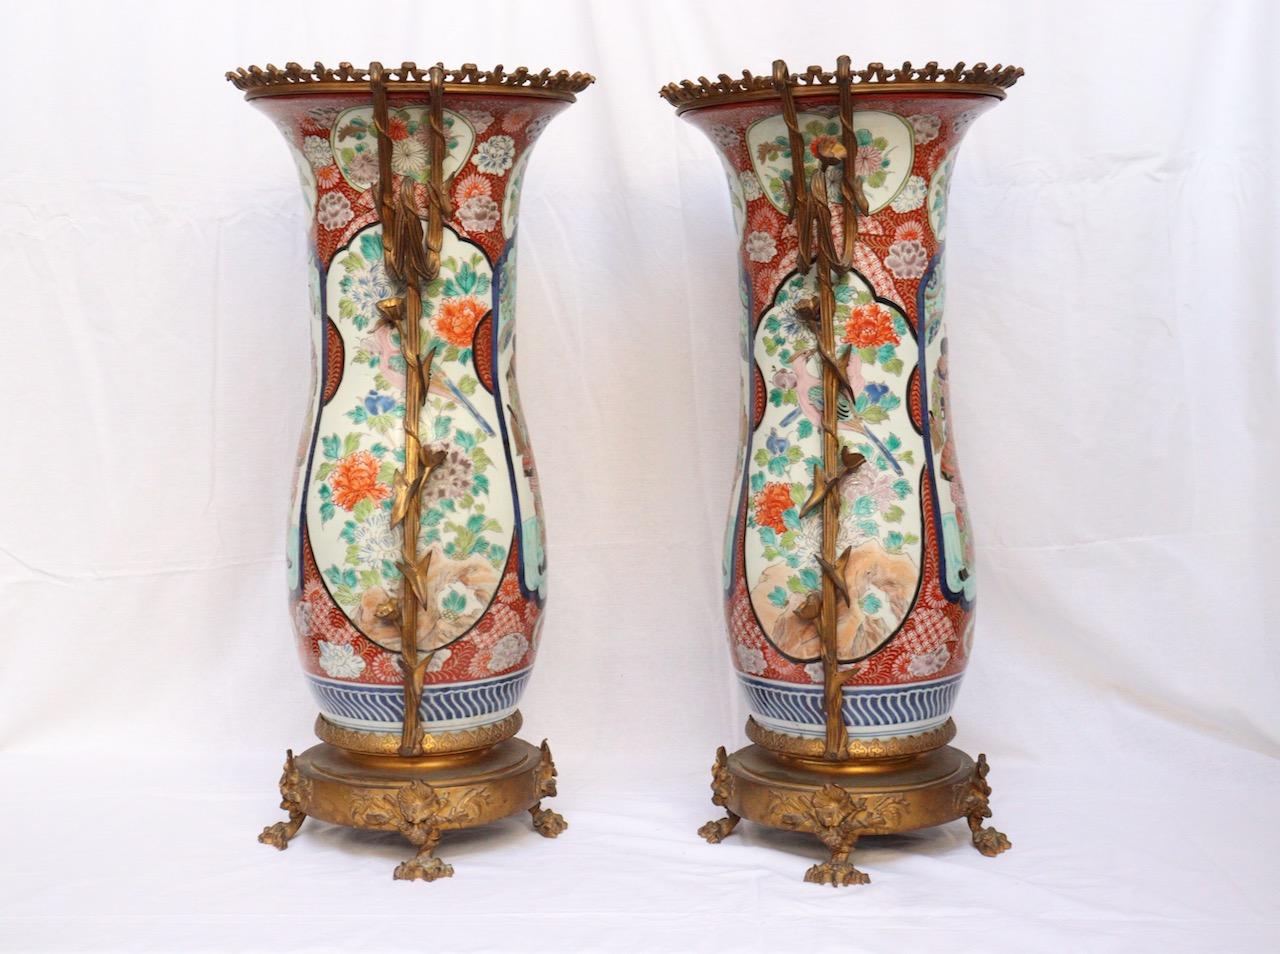 Japonisme 19th Century Japanese Porcelain and Ormolu-Mounted Pair of Vases